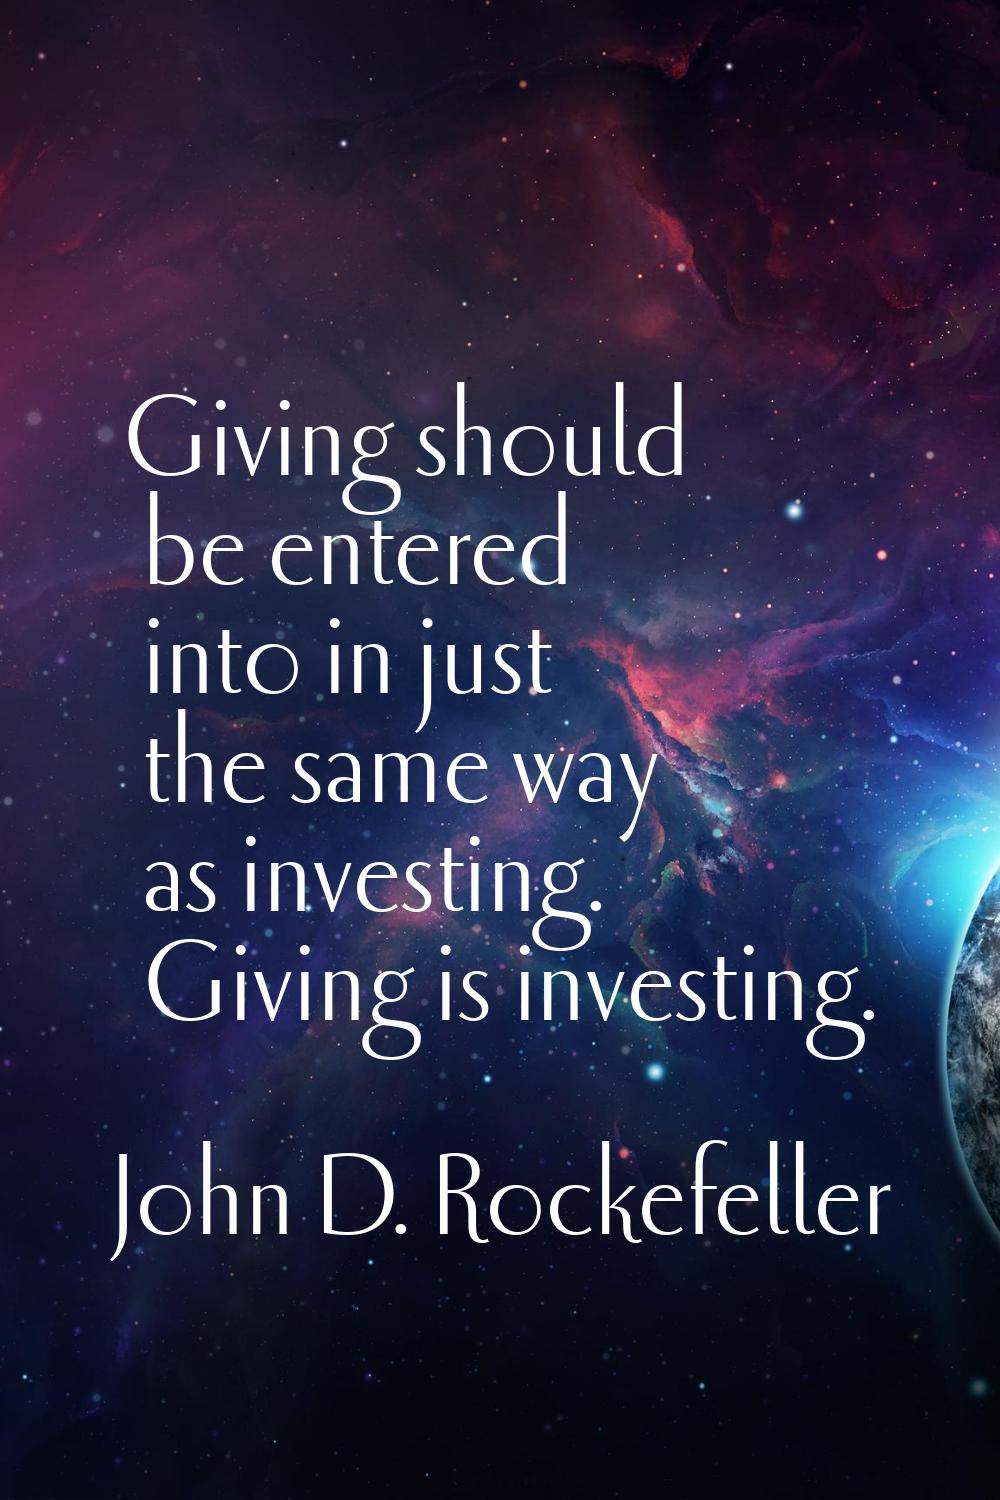 Giving should be entered into in just the same way as investing. Giving is investing.